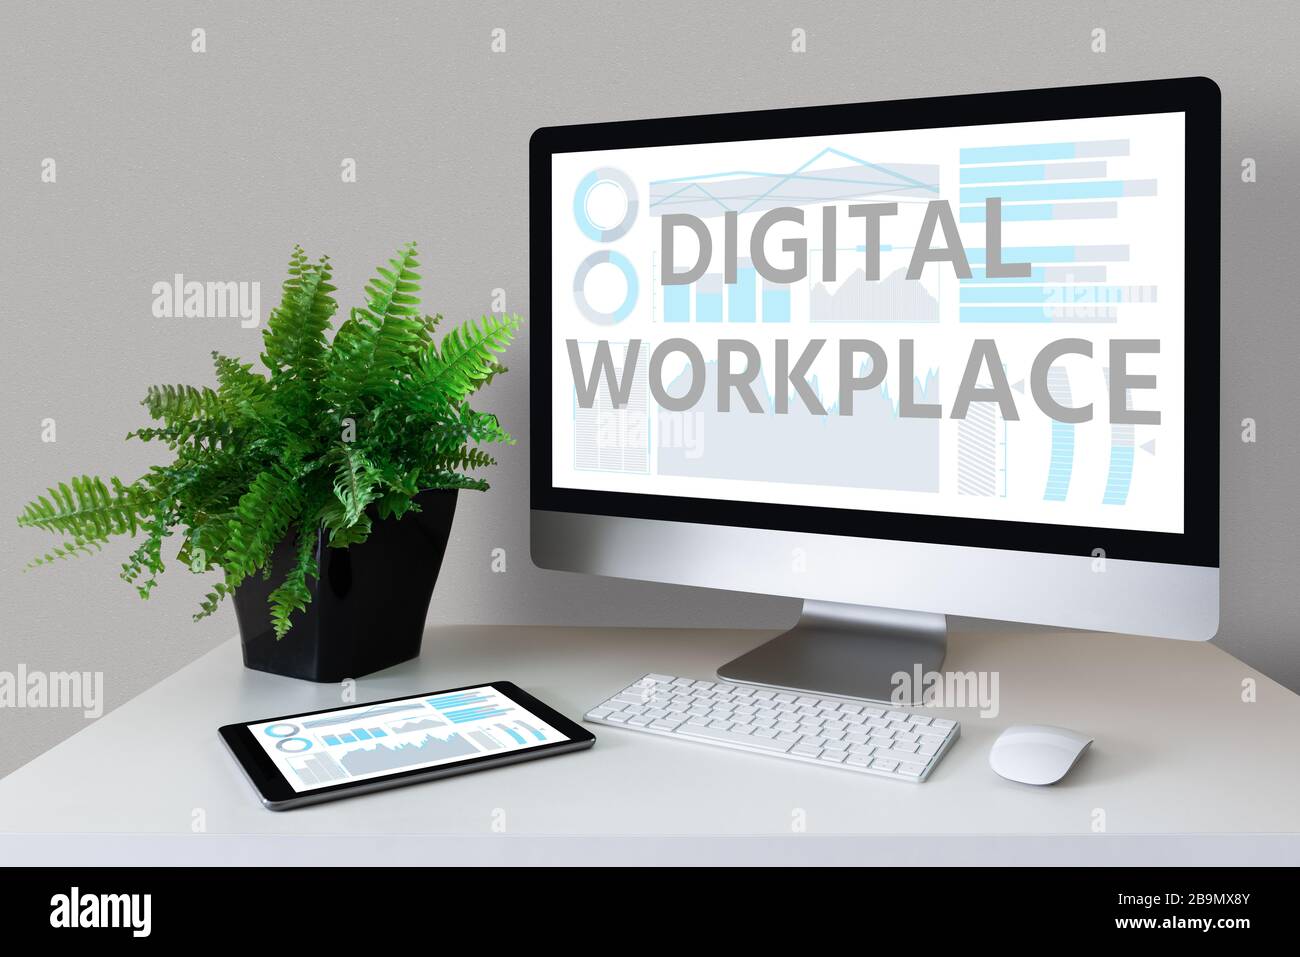 Digital workplace for remote work from home Stock Photo